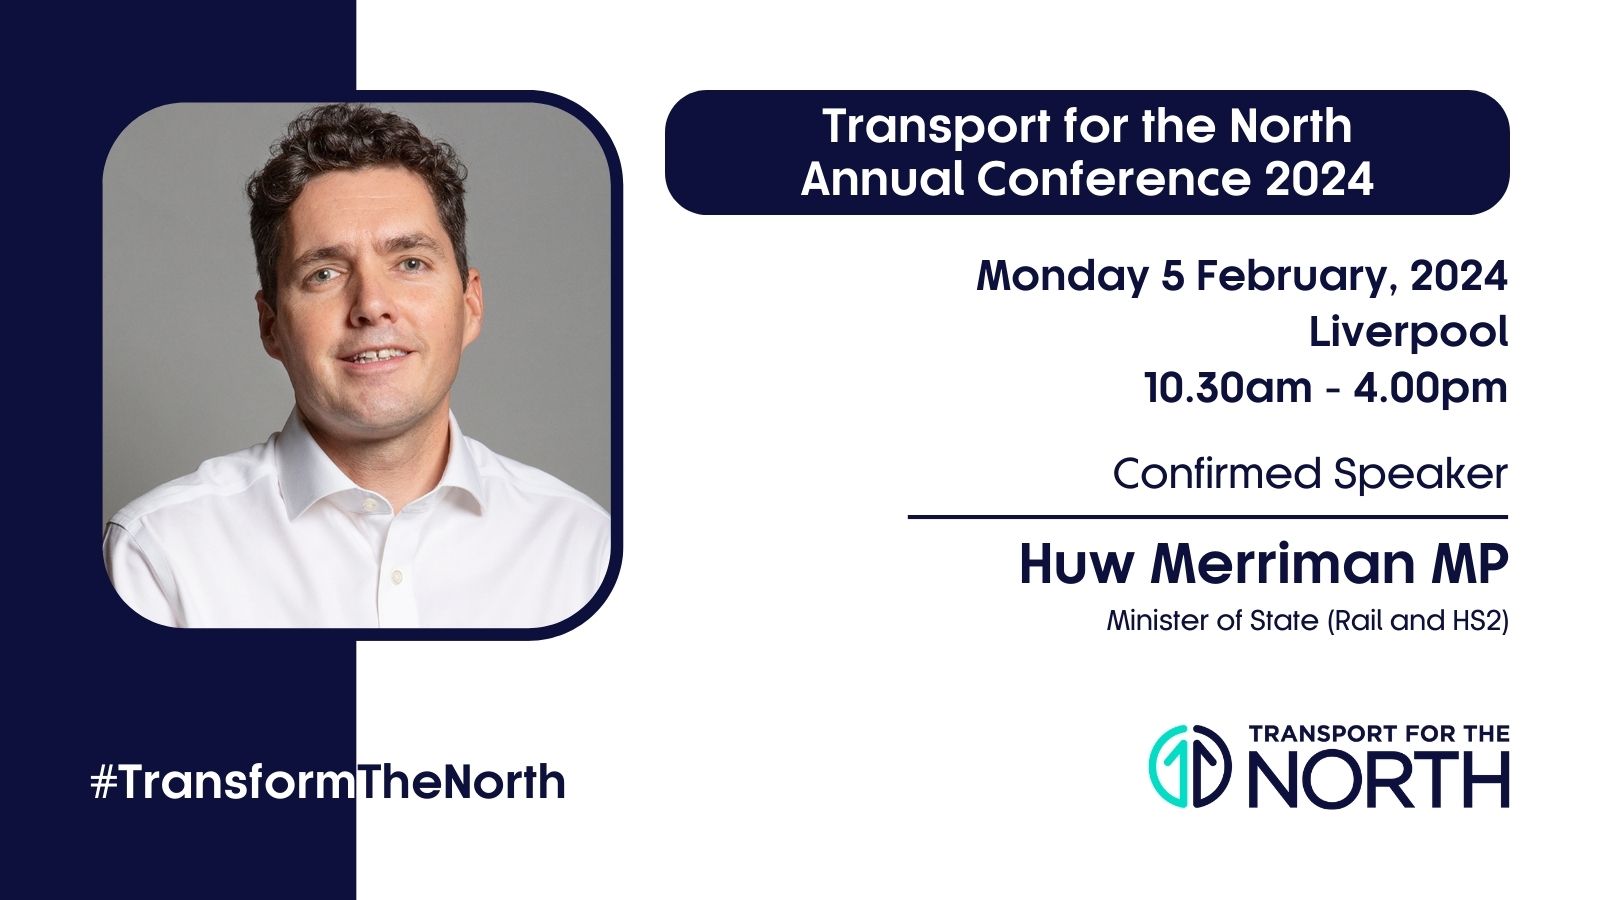 The Rail Minister Huw Merriman MP is confirmed as the keynote speaker at this year’s sold out Transport for the North annual conference